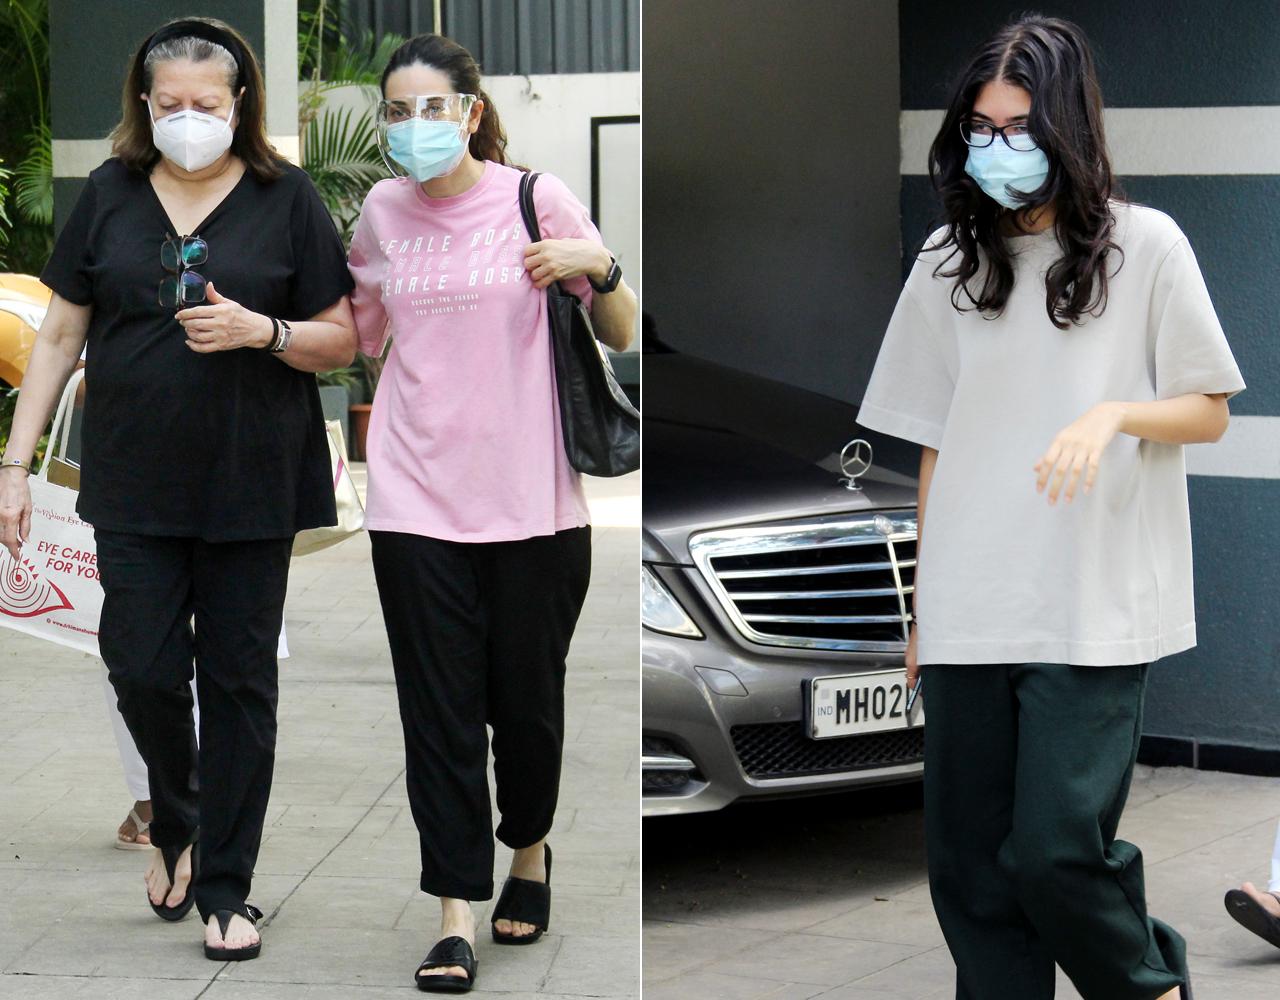 Karisma Kapoor was clicked with her mother-former actress Babita were clicked at a clinic in Juhu, Mumbai. While Karisma donned a pink oversized t-shirt, paired with black trouser, Babita was seen in all-black attire. Karisma's daughter Samaira was also spotted with the duo. (All pictures/Yogen Shah)